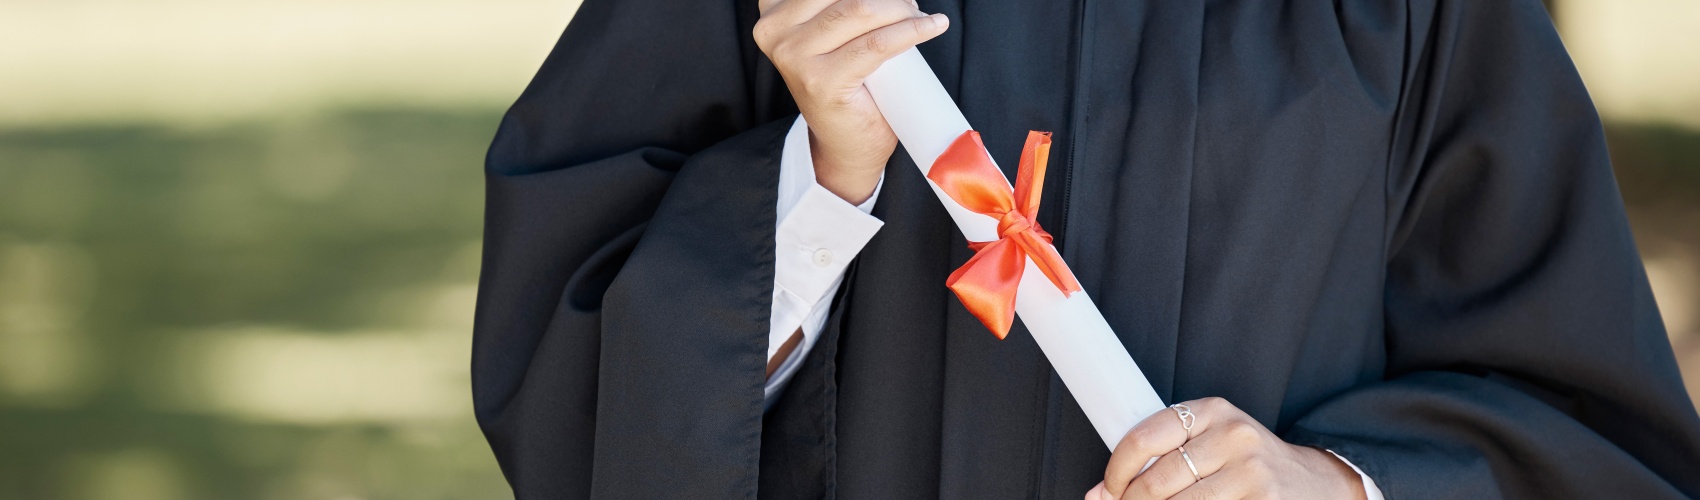 Woman in graduation gown holding degree scroll